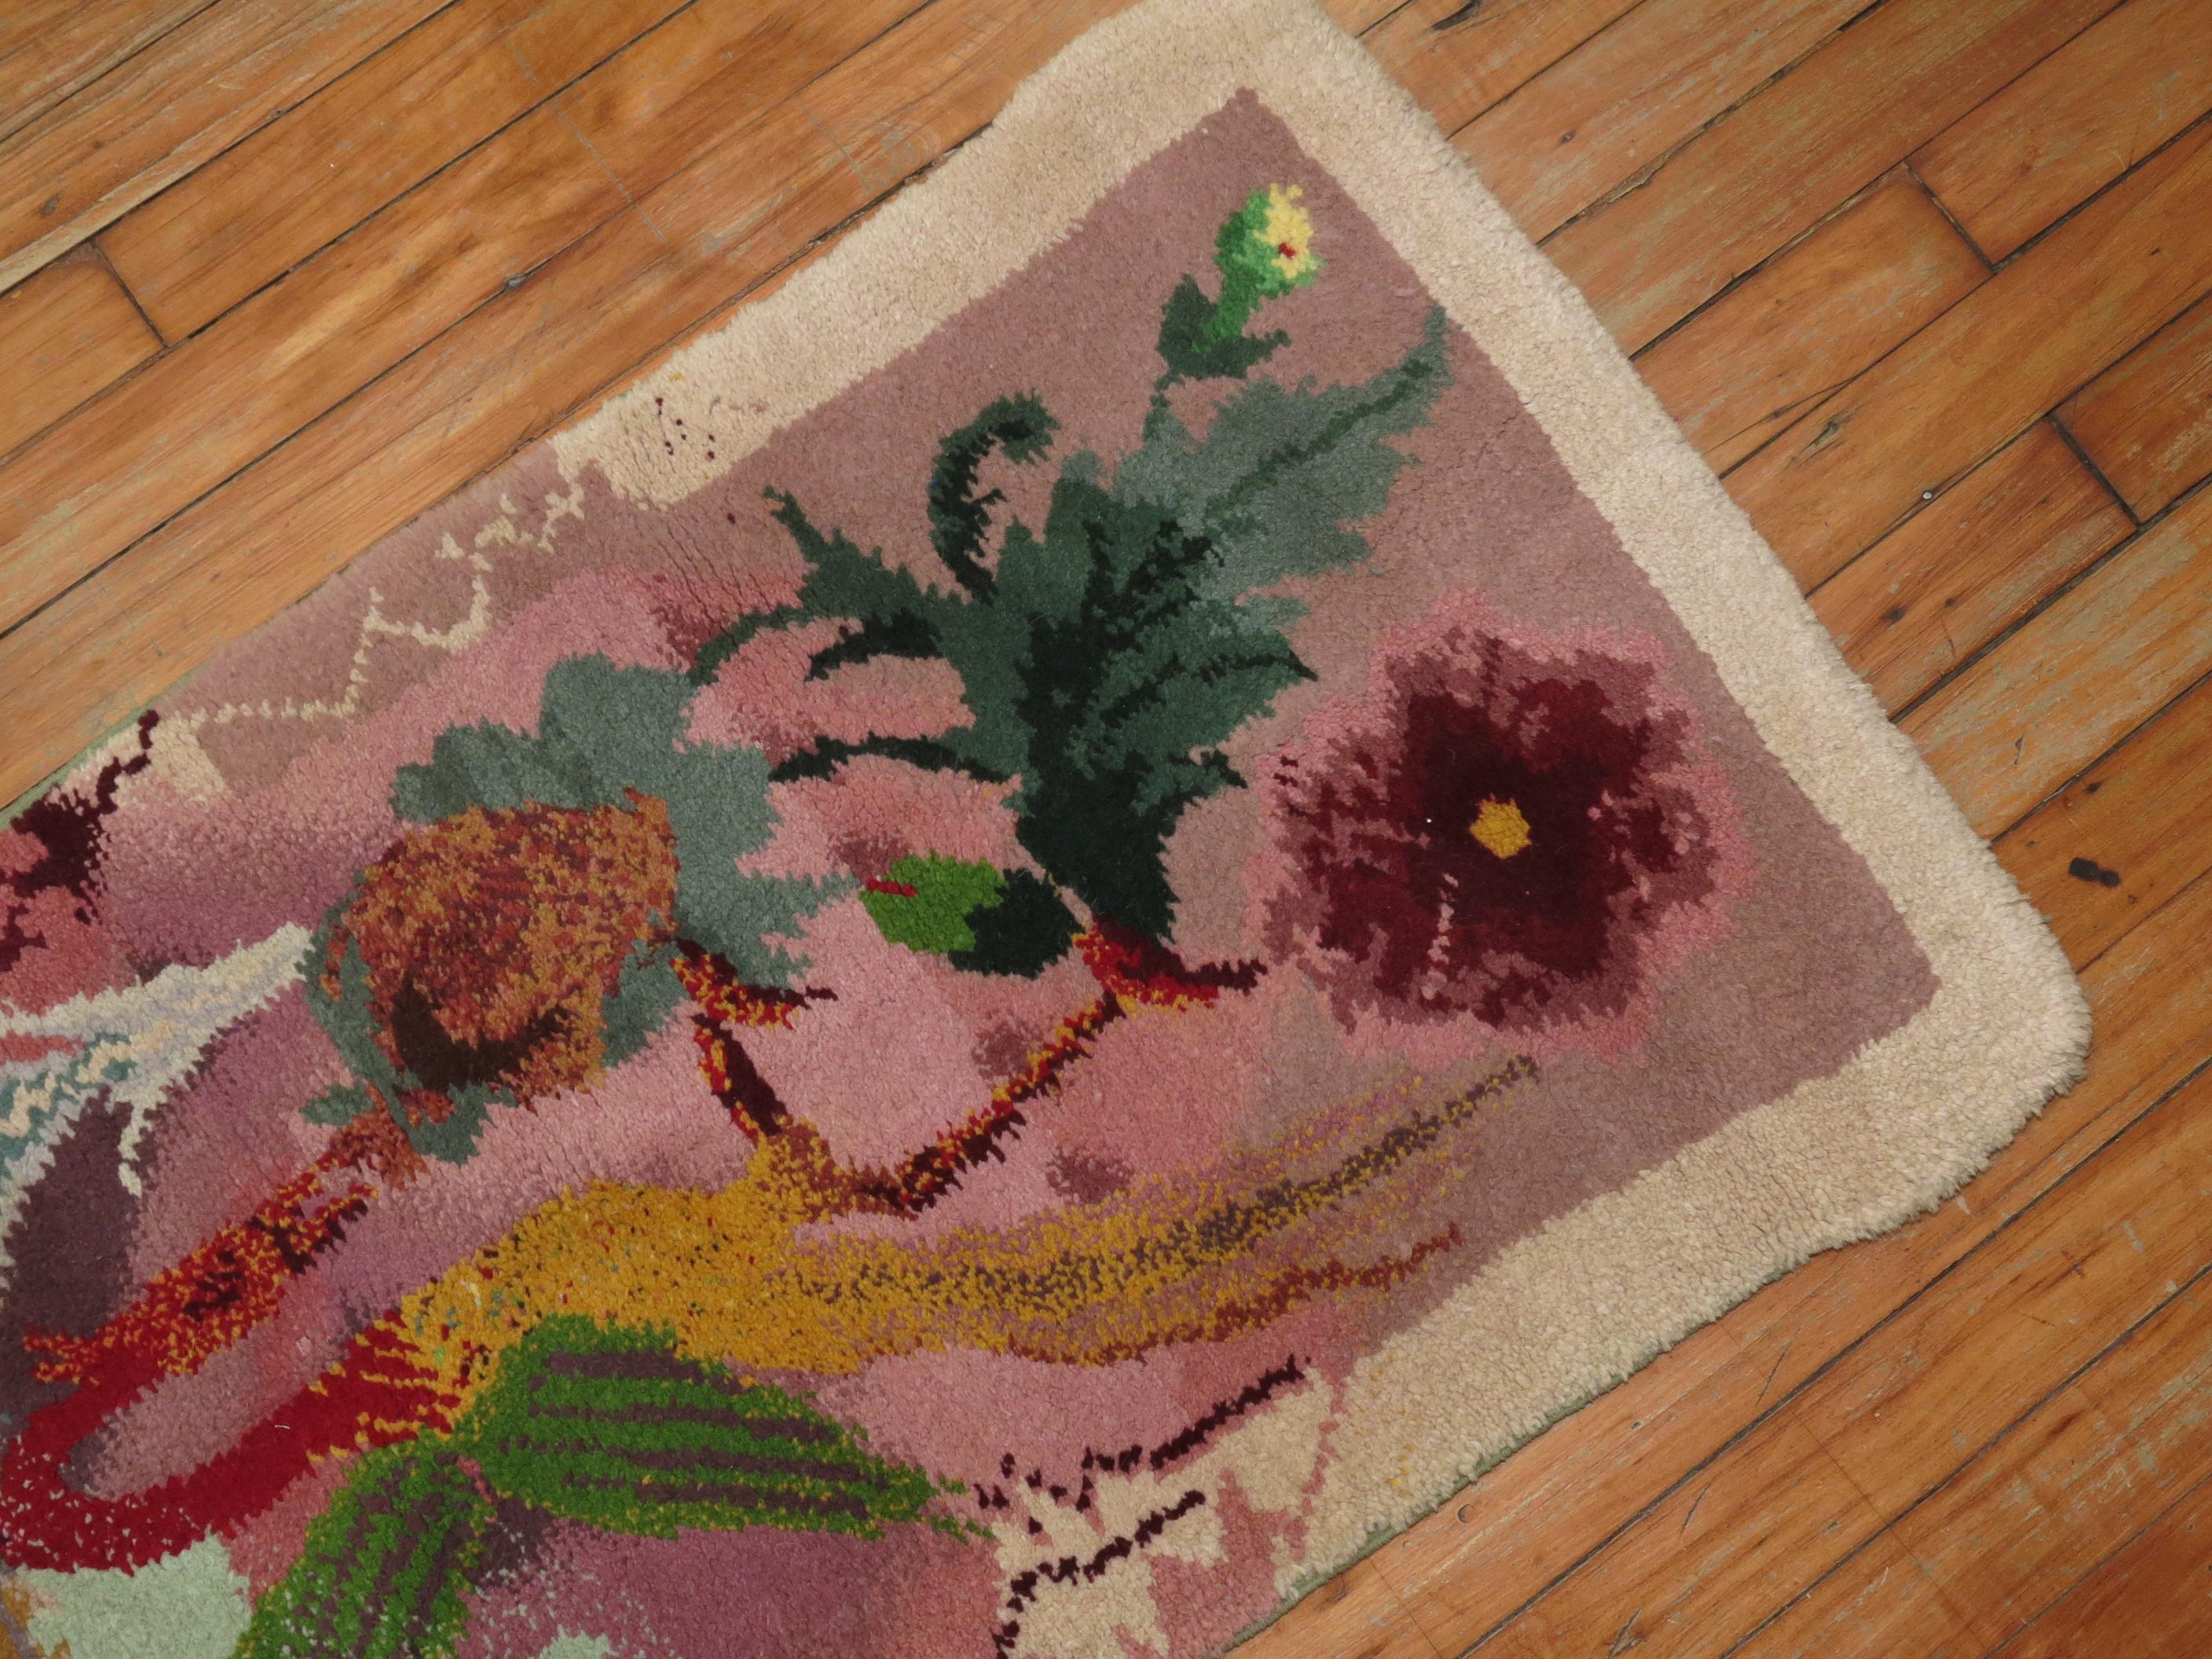 Marvelous small Swedish Rya rug from the middle of the 20th century.

 Swedish Rya rugs are extremely colorful, lovely and quite chic and each have itheir own character to them. They tend to have thicker shaggy piles which were meticulously